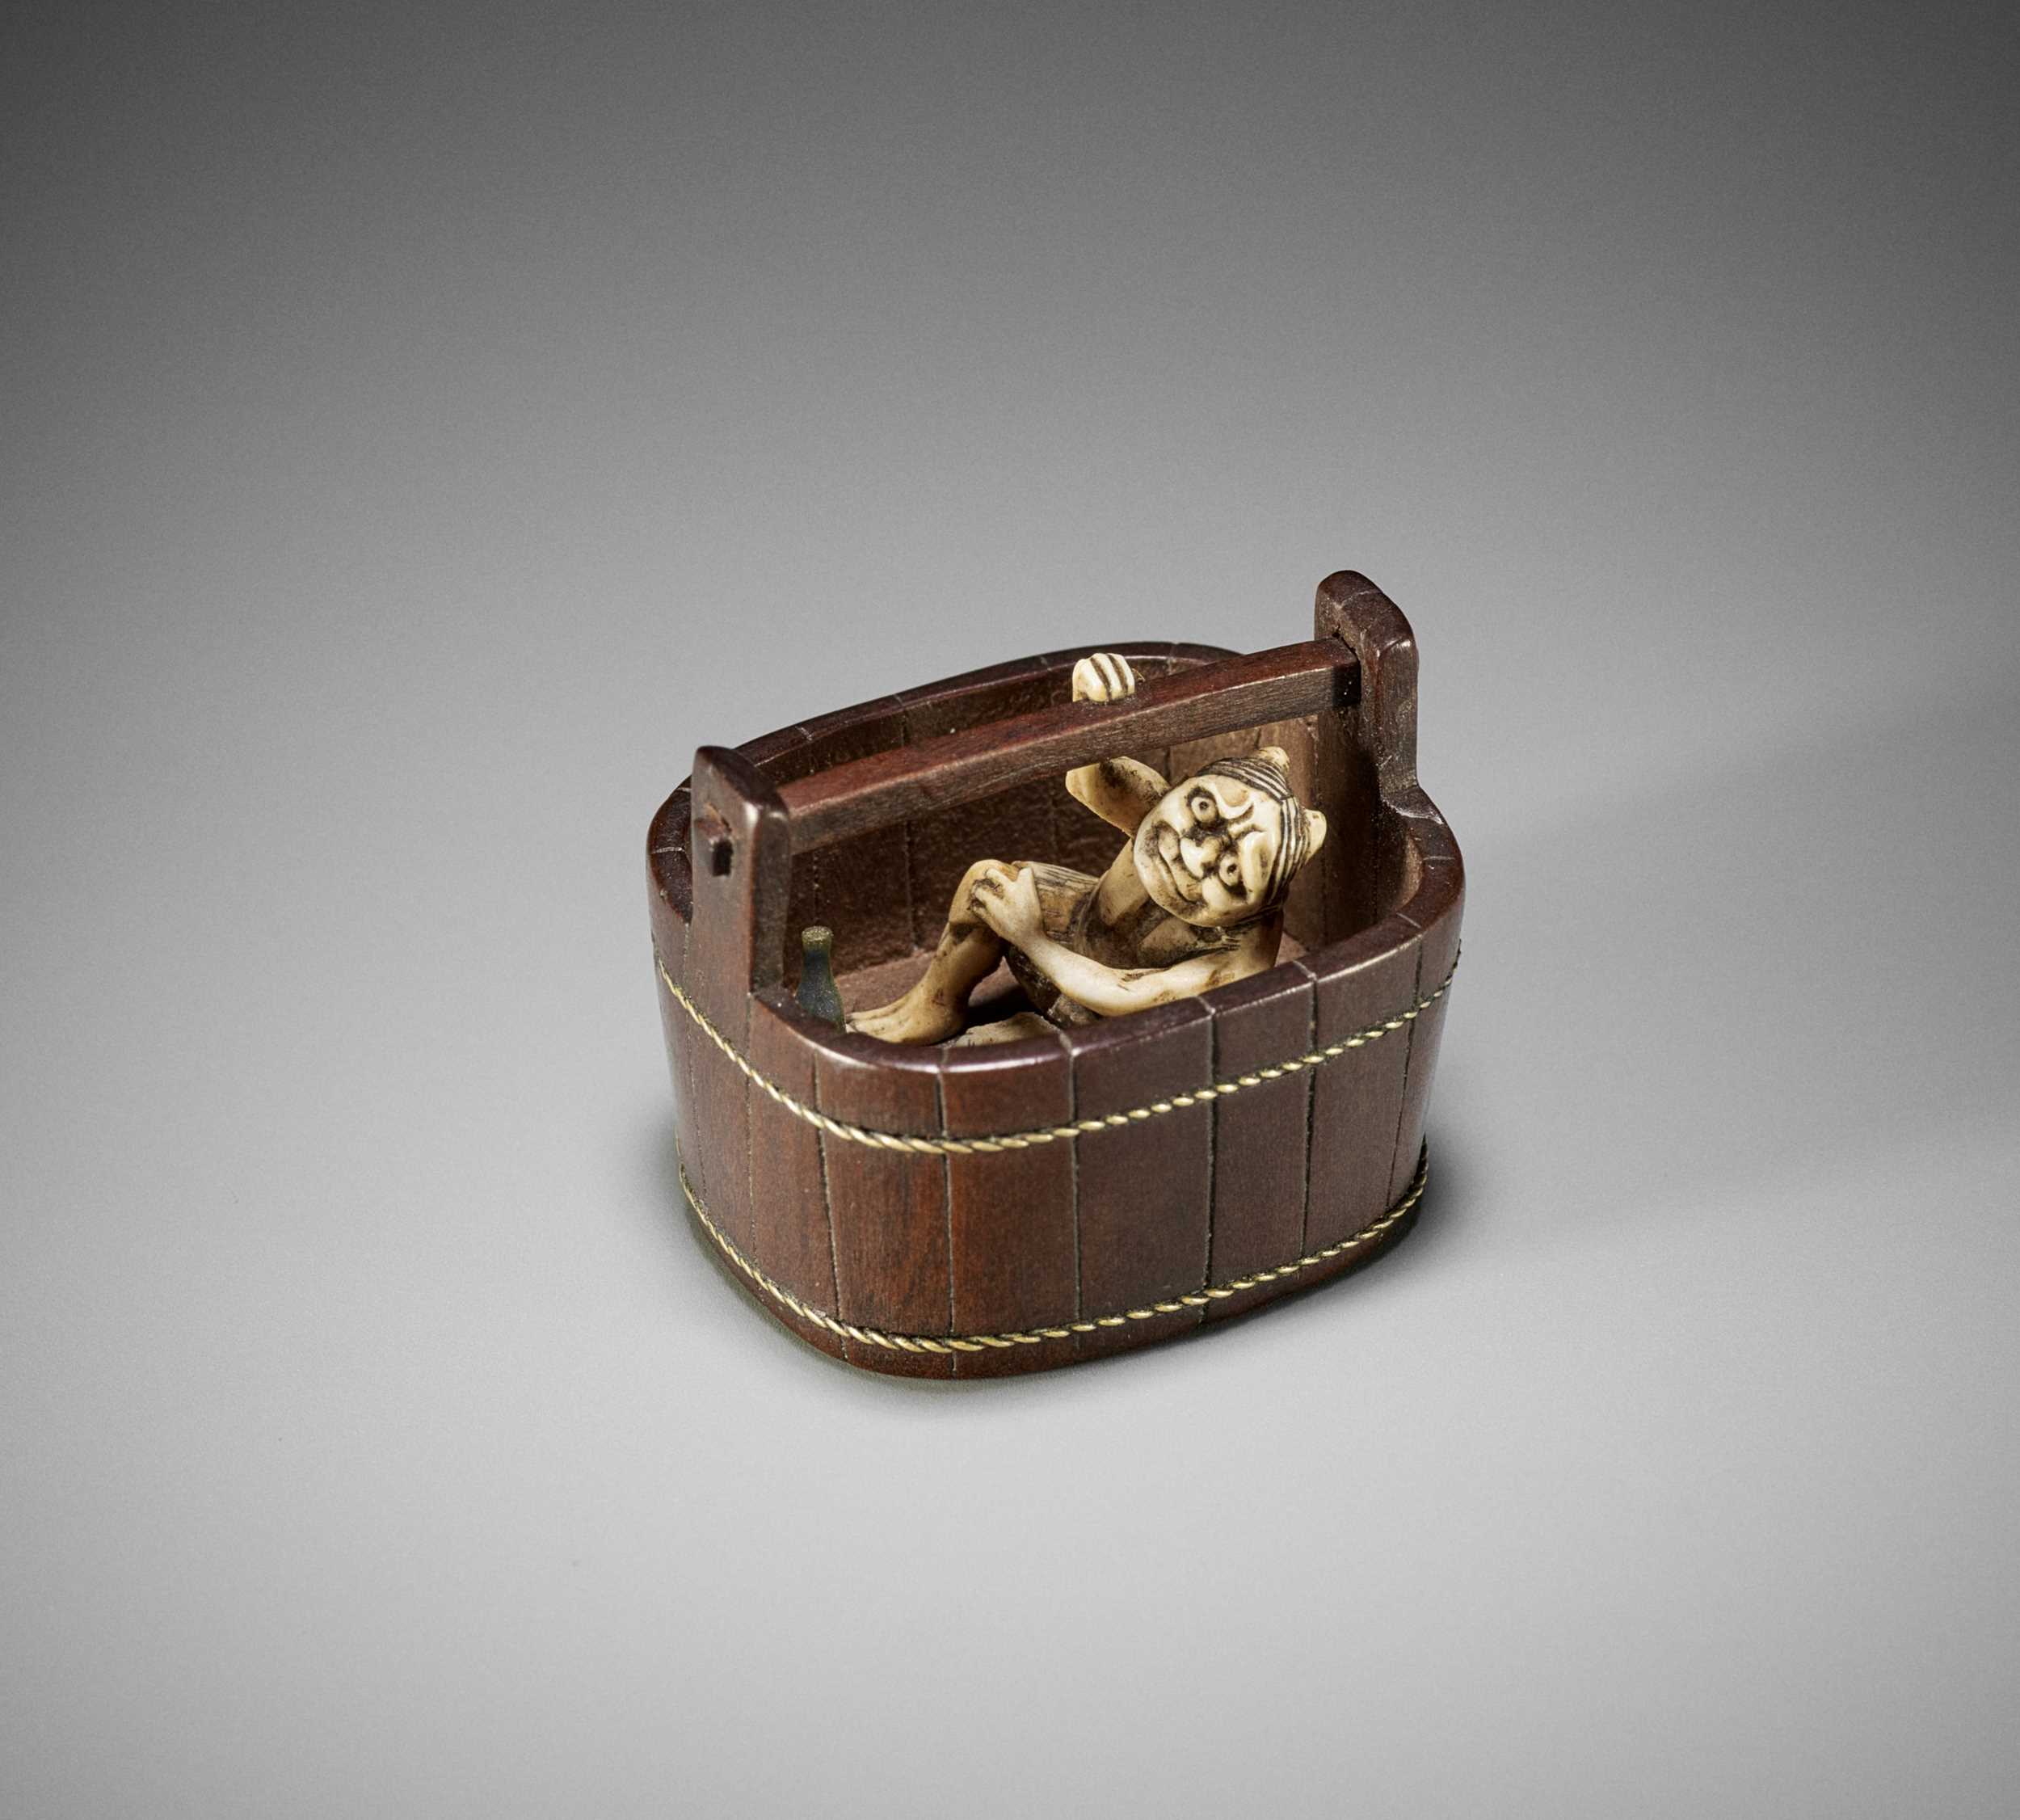 Lot 208 - A FINE TOKOKU STYLE MIXED MATERIAL NETSUKE OF AN ONI IN A BUCKET